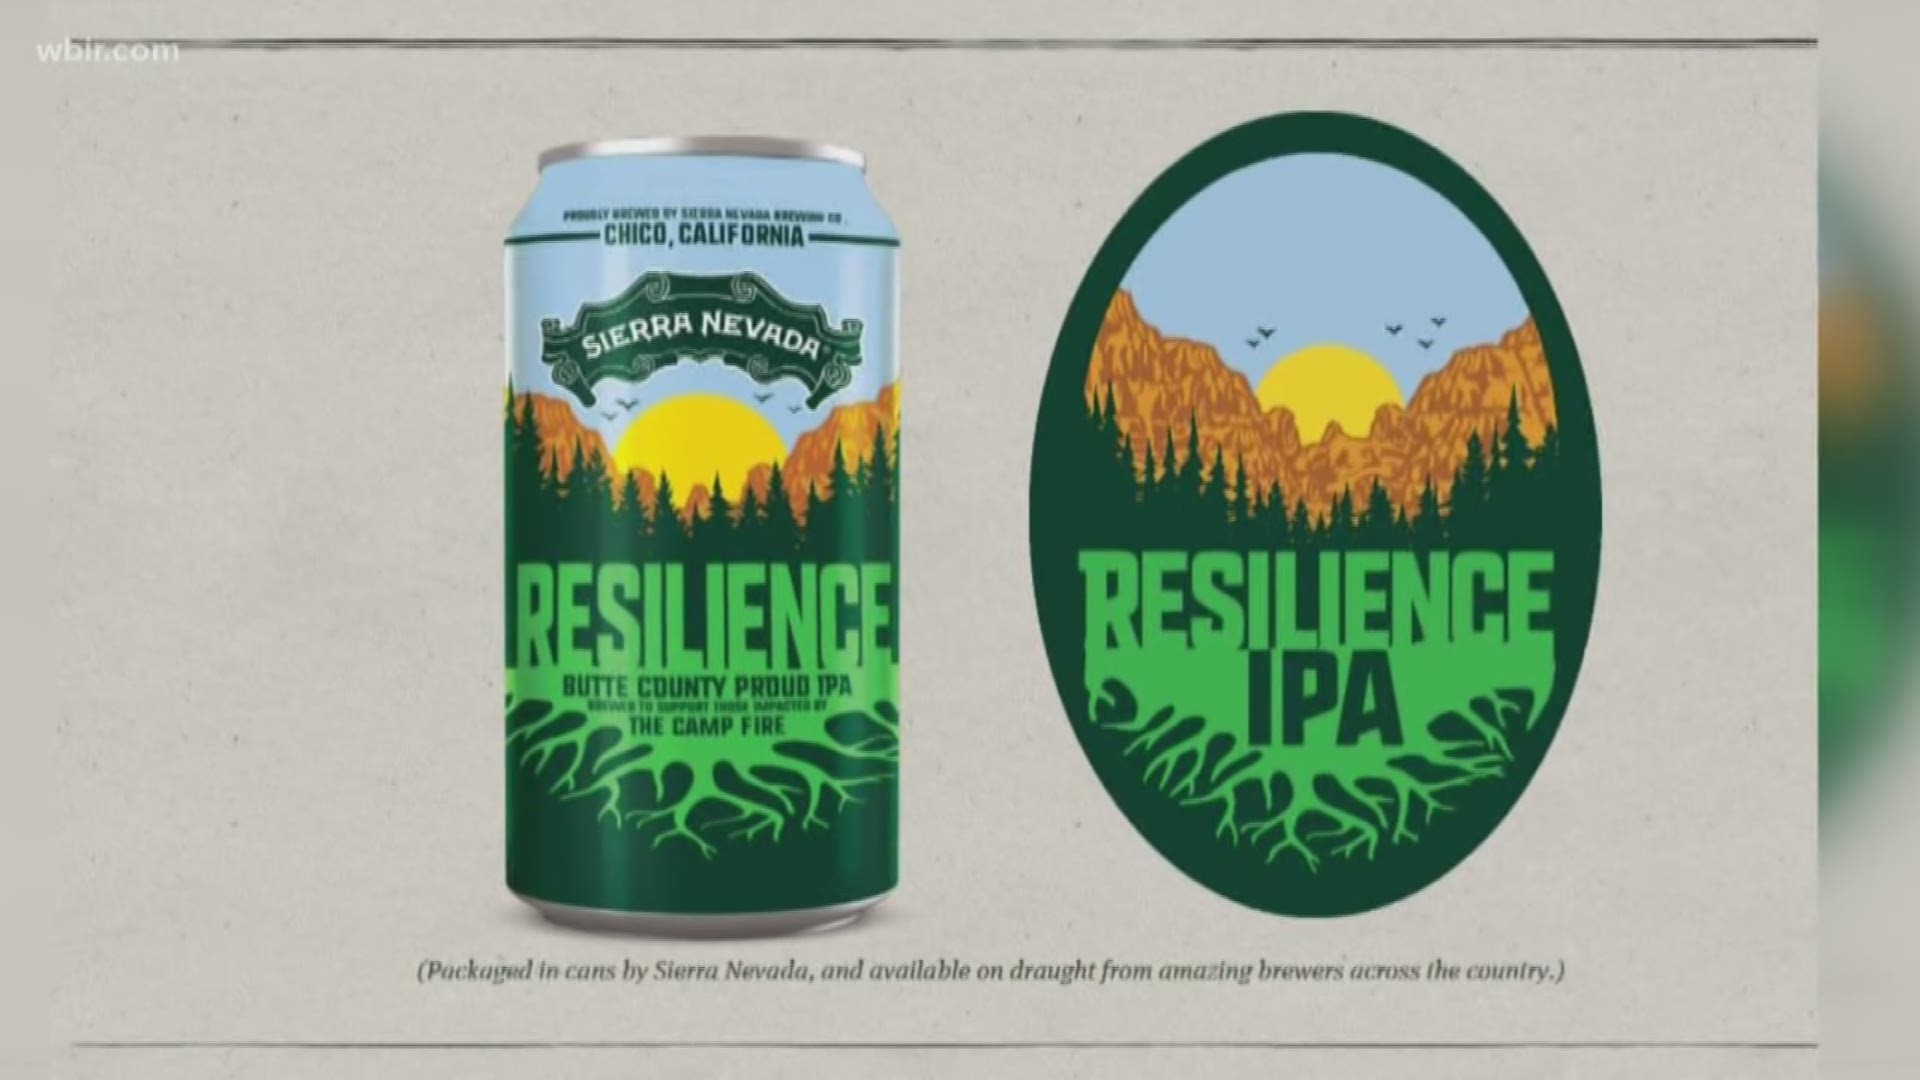 Sierra Nevada called on brewers across the country to unite and help victims of the fire, so they created Resilience